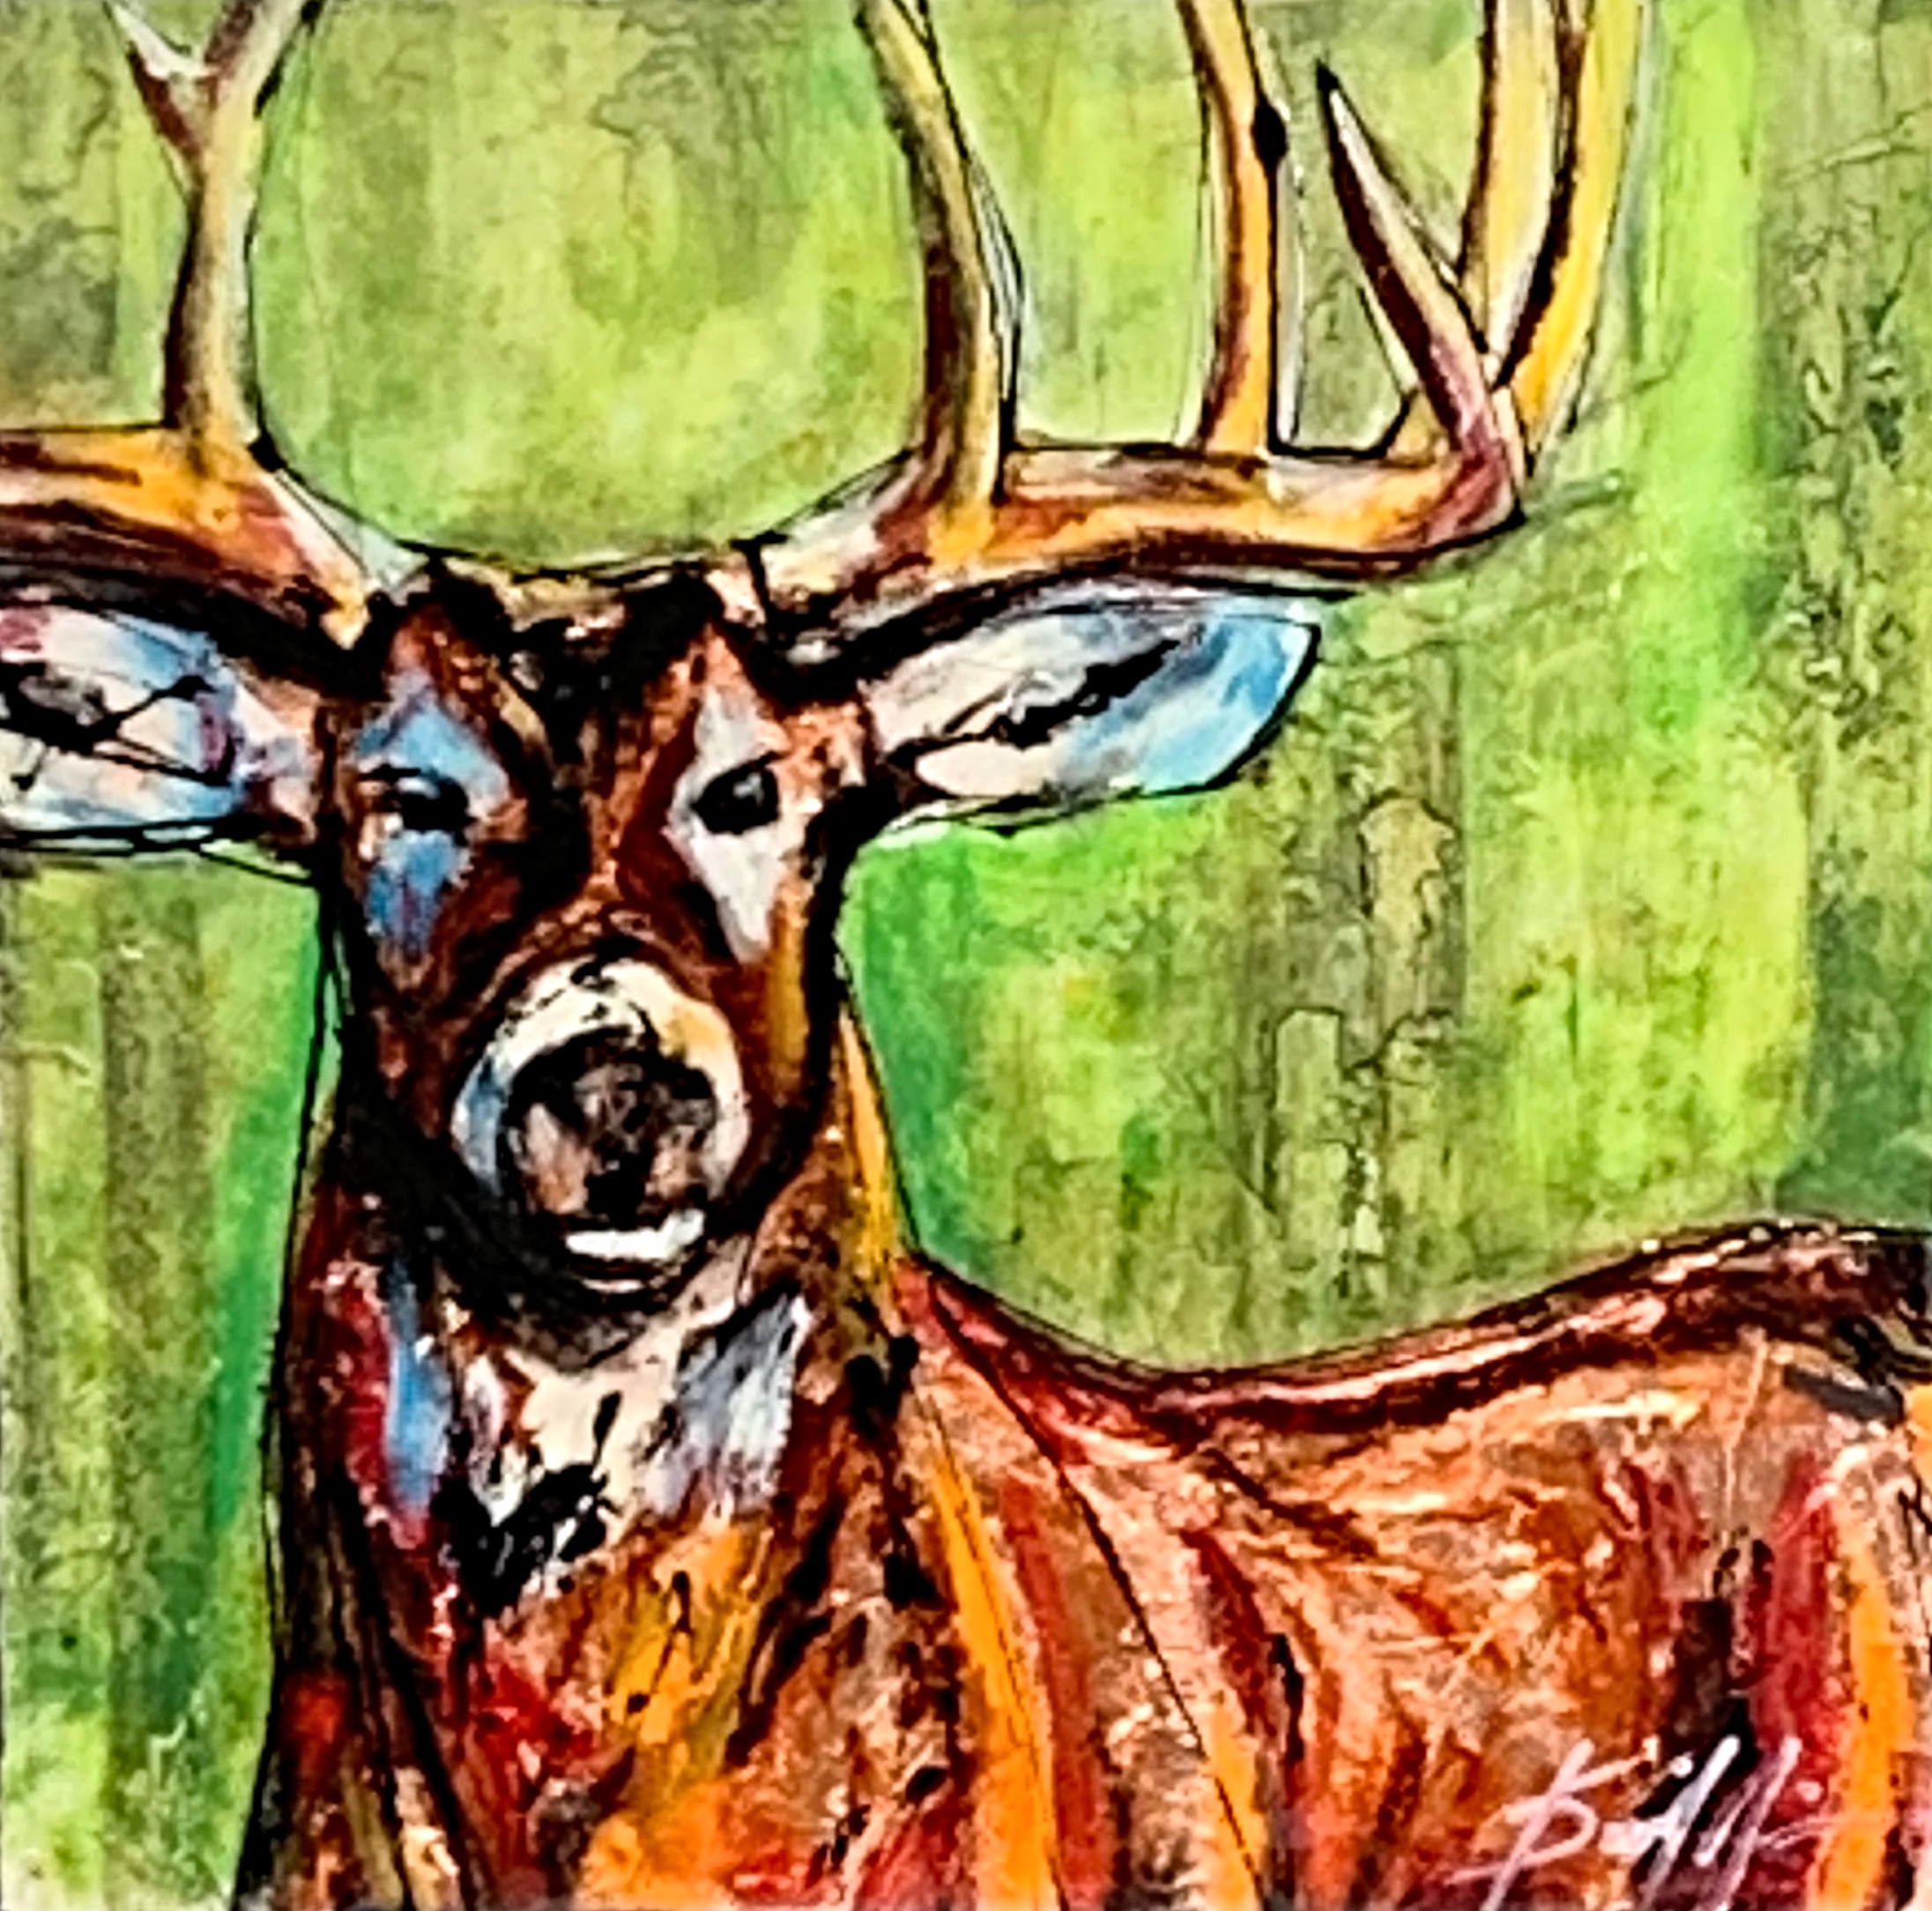 Stranger, mixed media deer painting by David Zimmerman | Effusion Art Gallery + Cast Glass Studio, Invermere BC